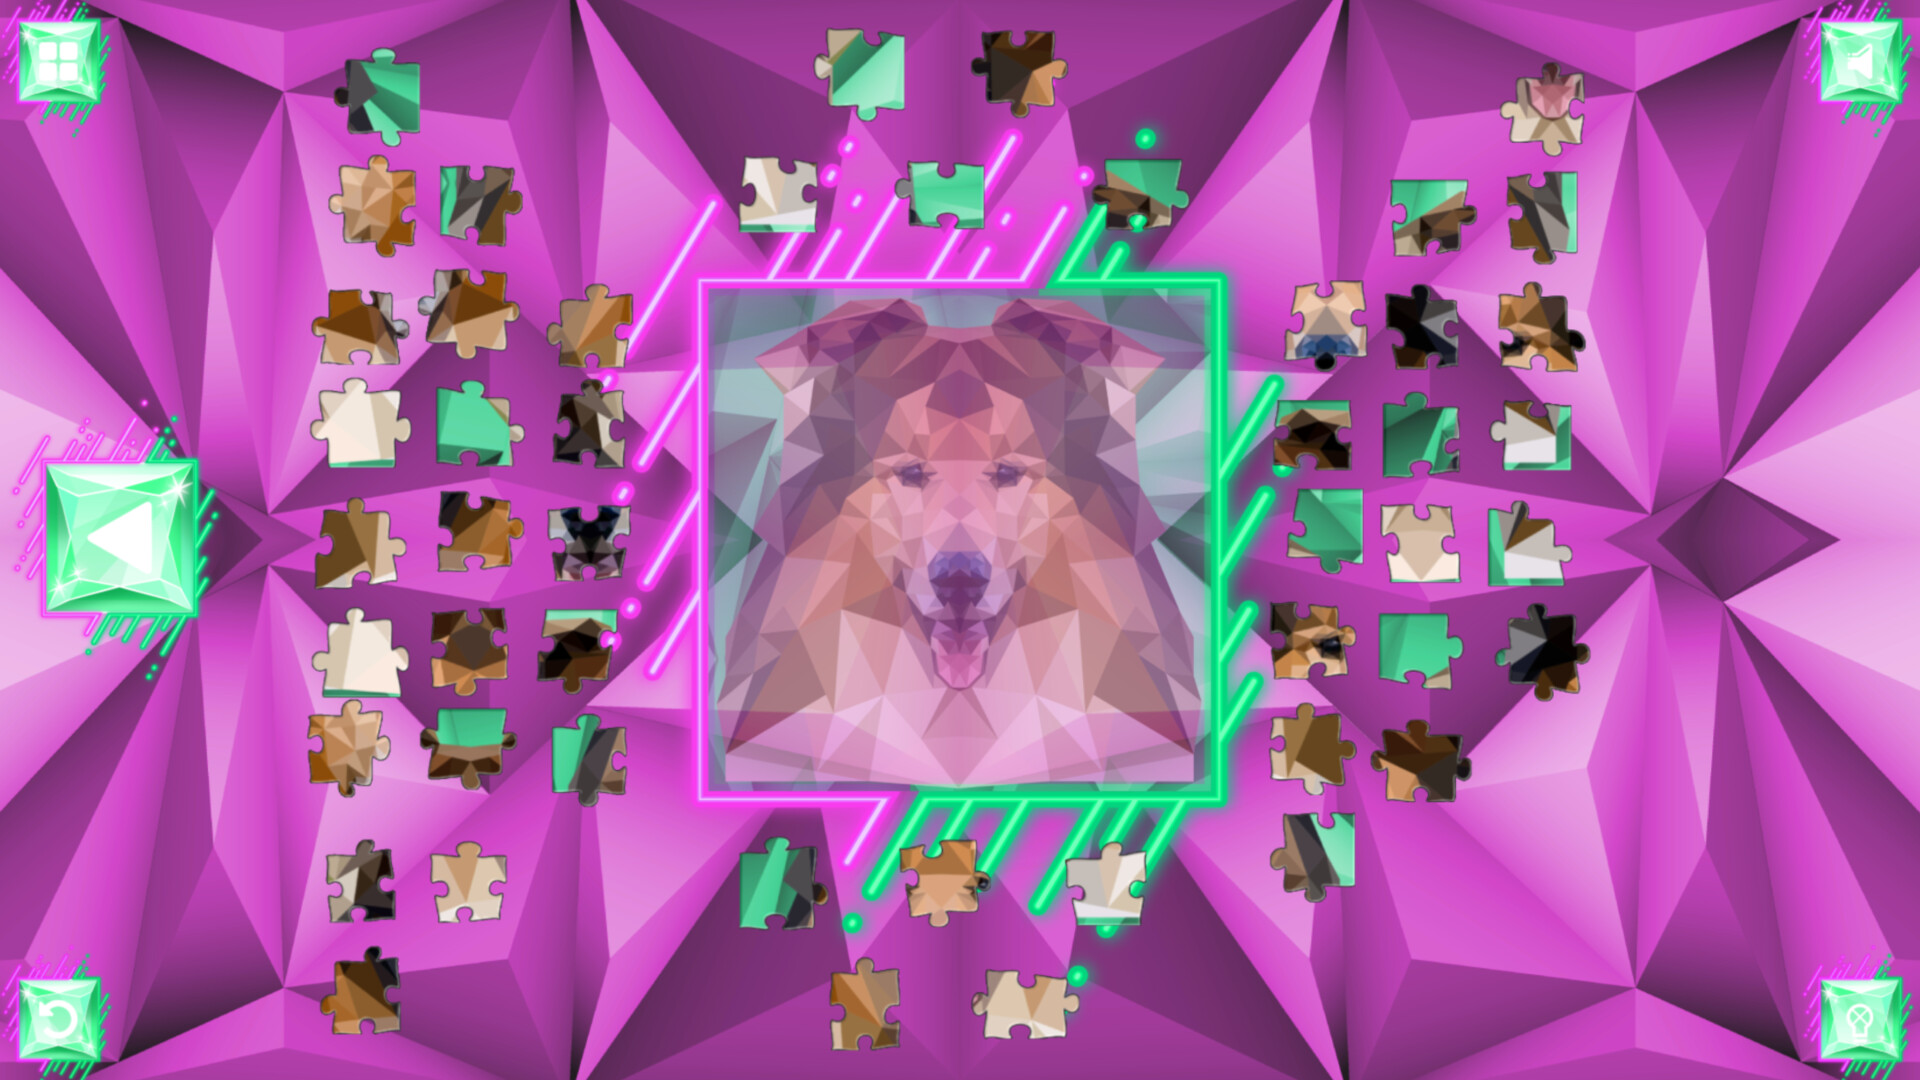 Bepuzzled Puppy Dog Jigsaw Puzzle on Steam